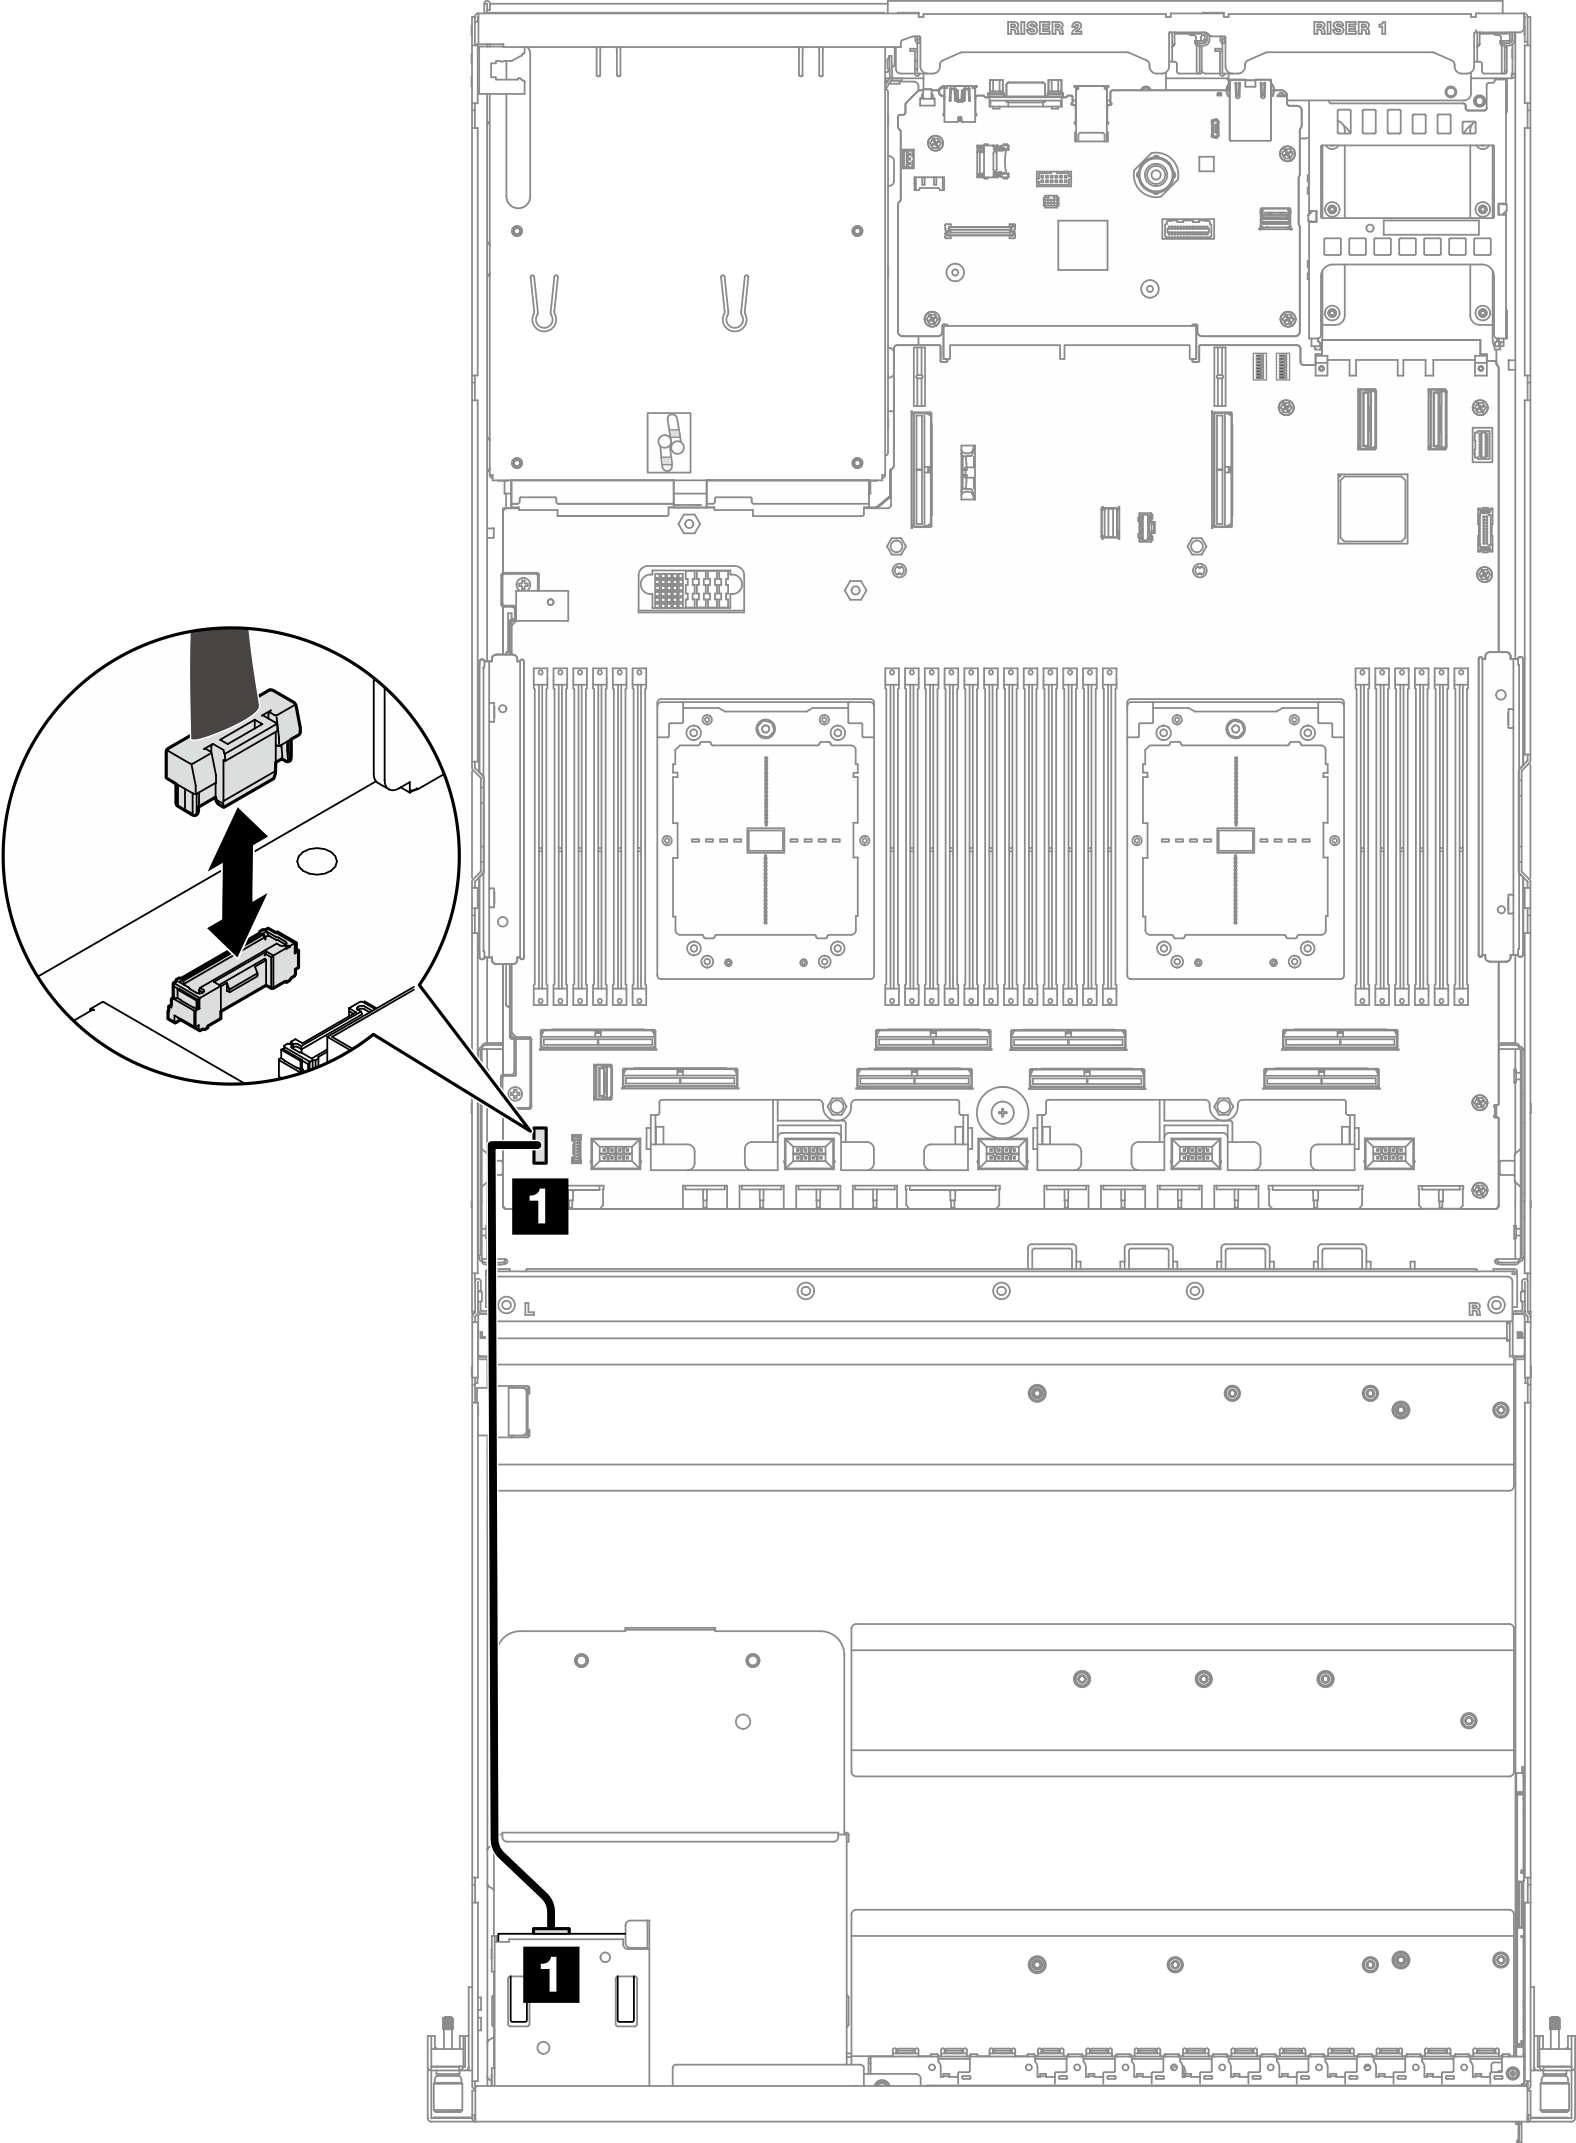 Front operator panel cable disconnection — 4-DW GPU 型号 and 8-DW GPU 型号